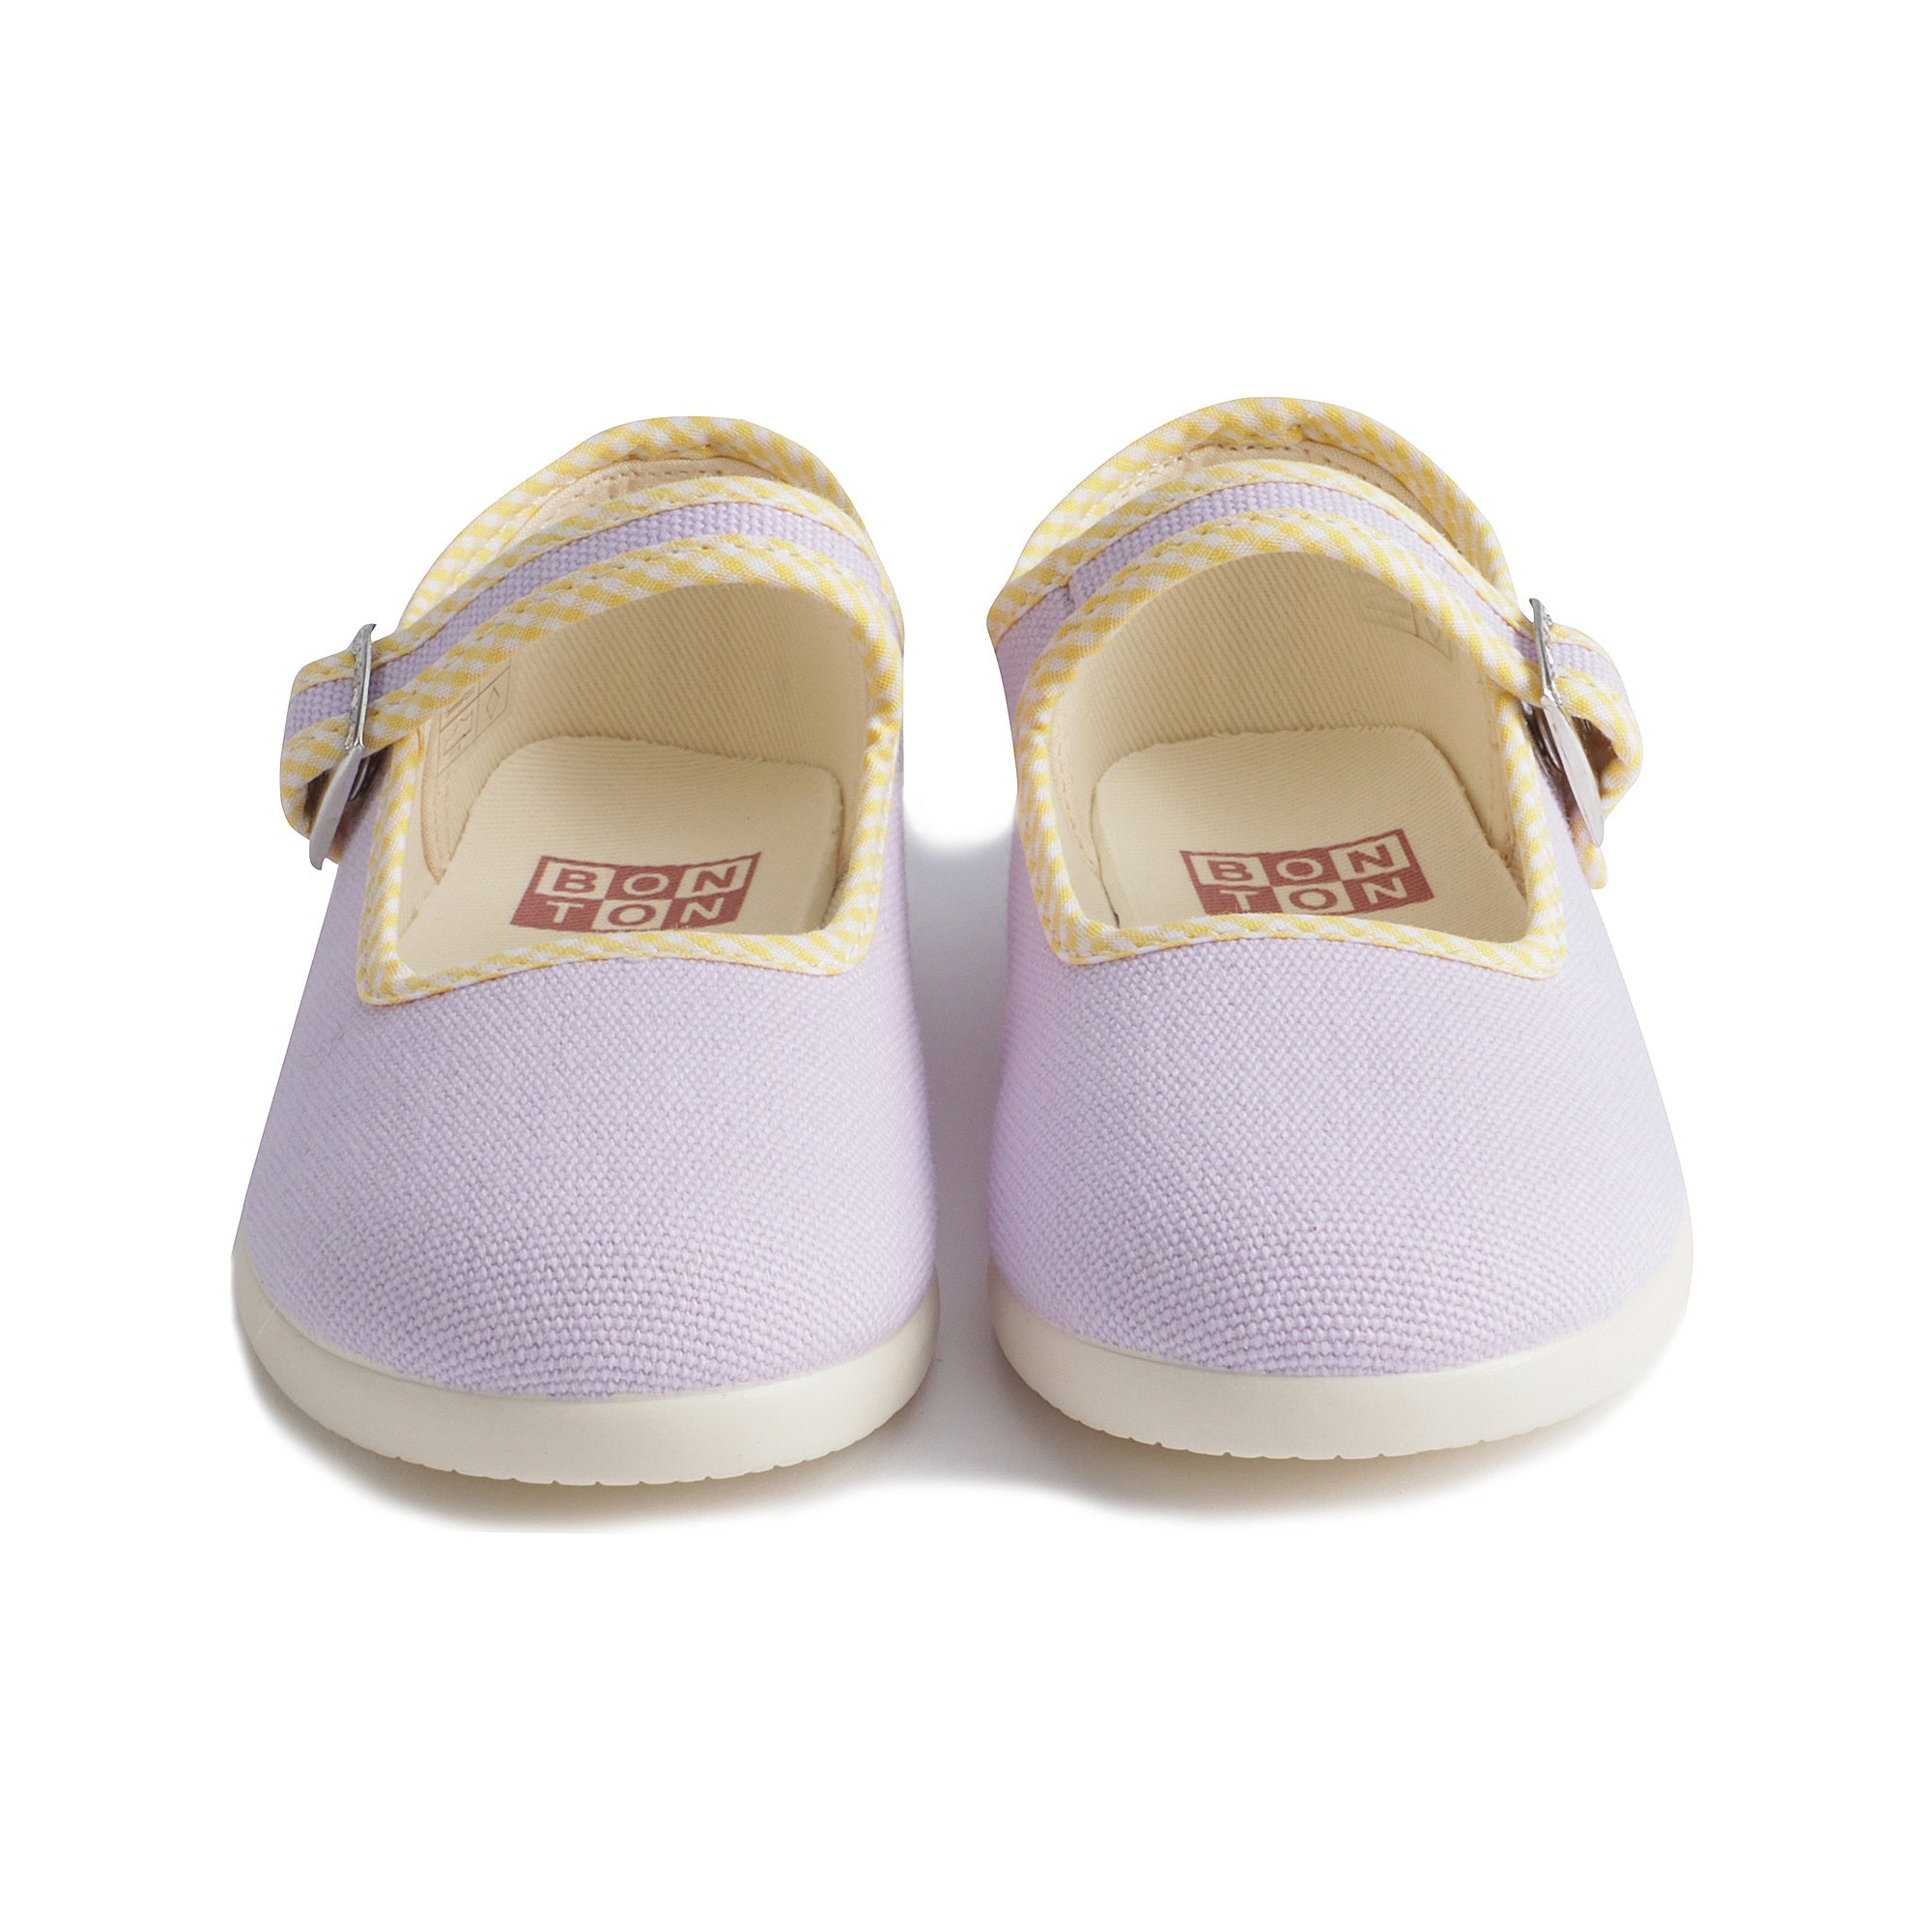 Girls Purple Buckled Cotton Shoes